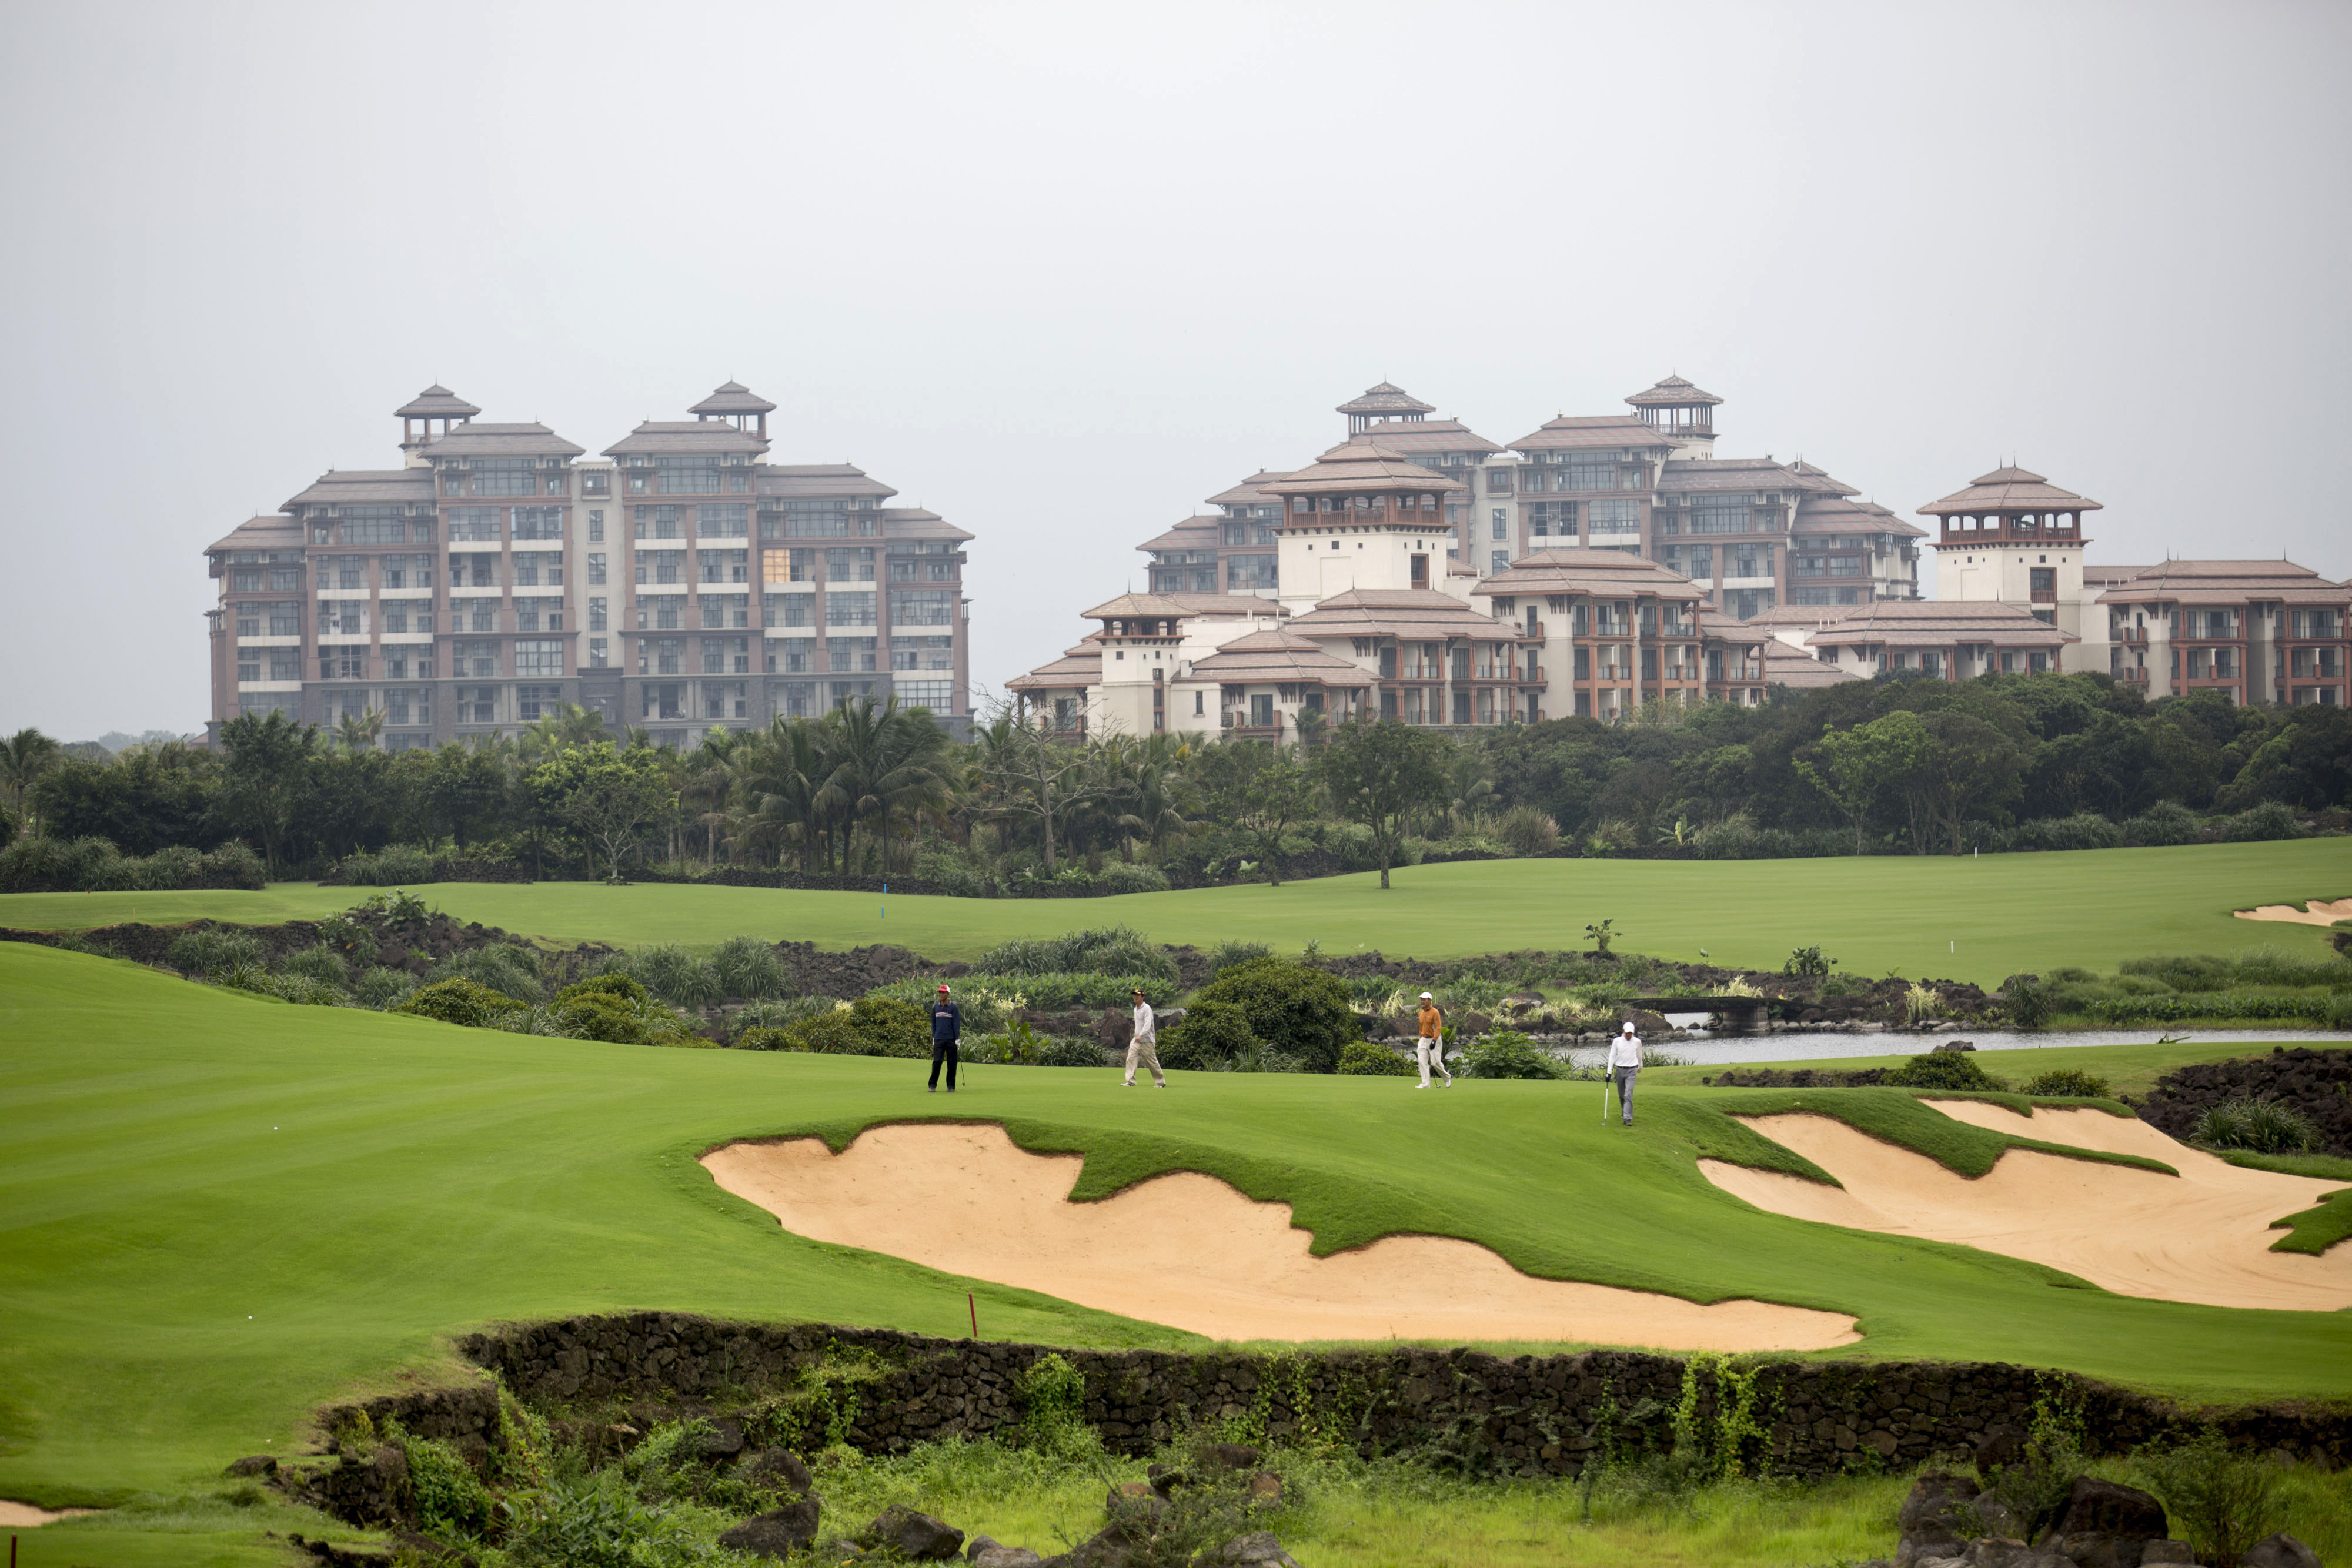 Residential properties stand in the background as men play golf at Mission Hills Resort Haikou in Haikou, in the Chinese province of Hainan province, on April 5, 2014 (Brent Lewin—Bloomberg/Getty Images)